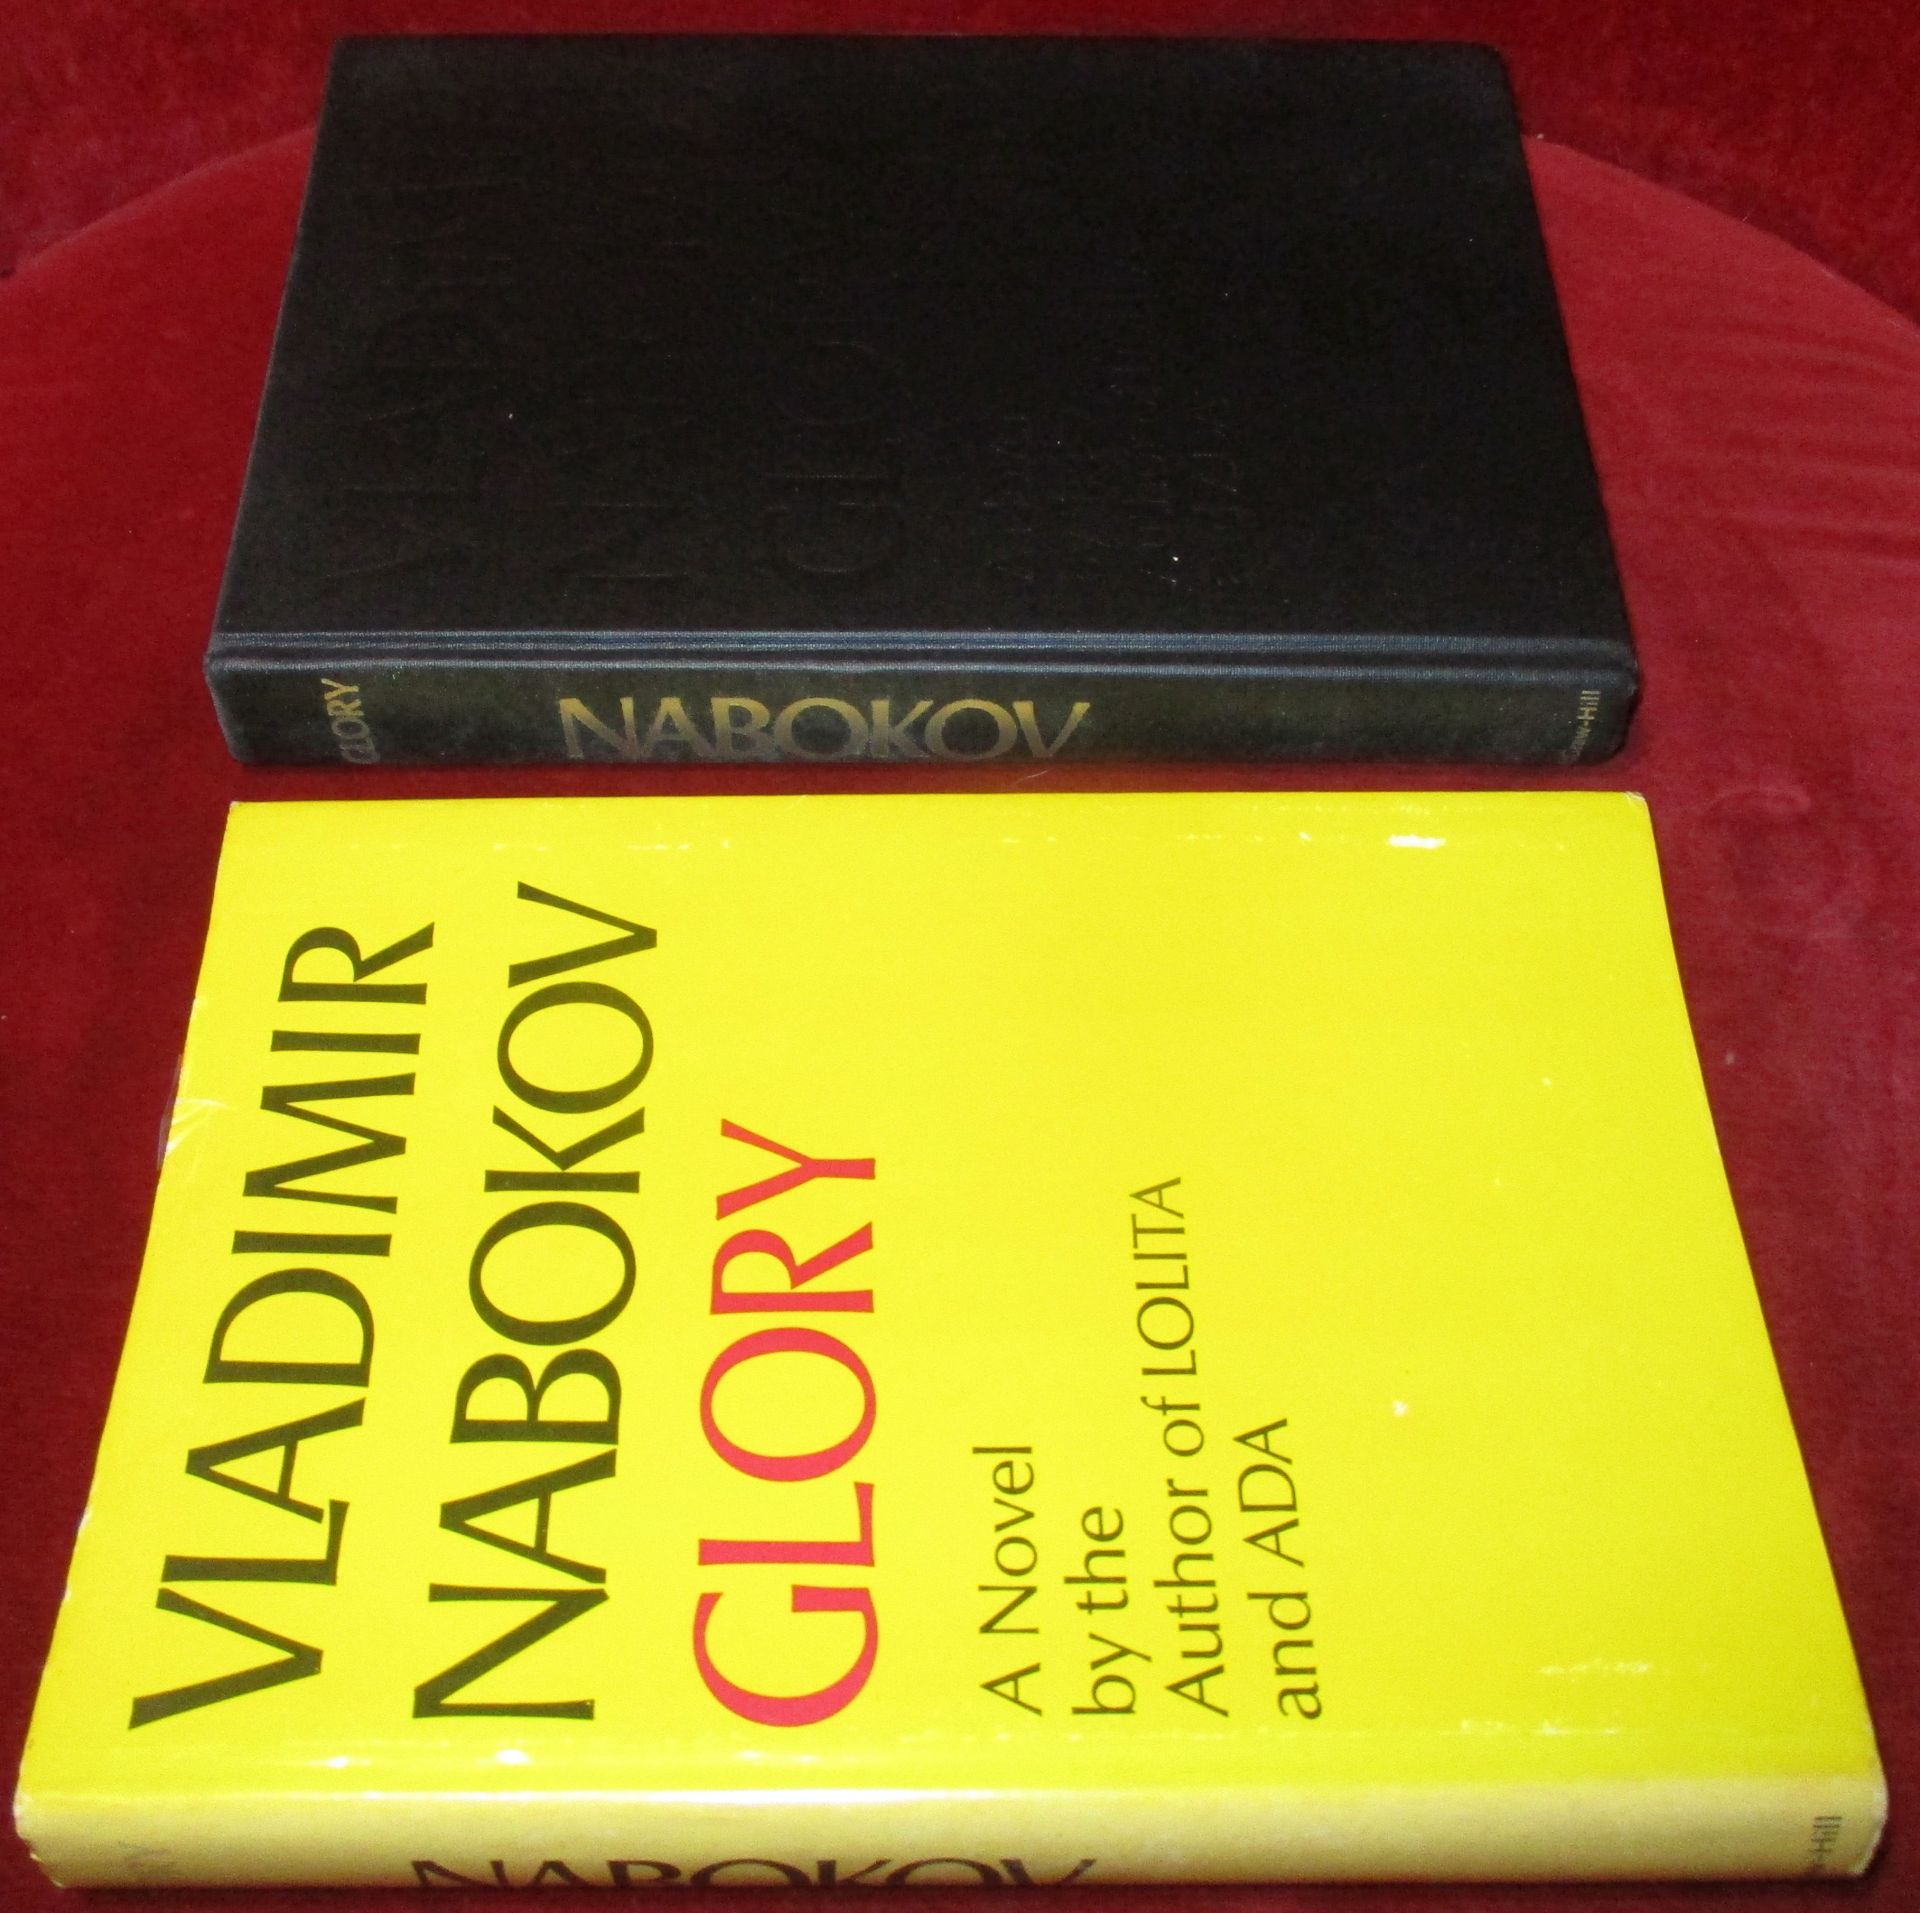 Vladimir Nabokoy Glory. A novel. Translated from the Russian by Dmitri Nabokov in collaboration with the Author